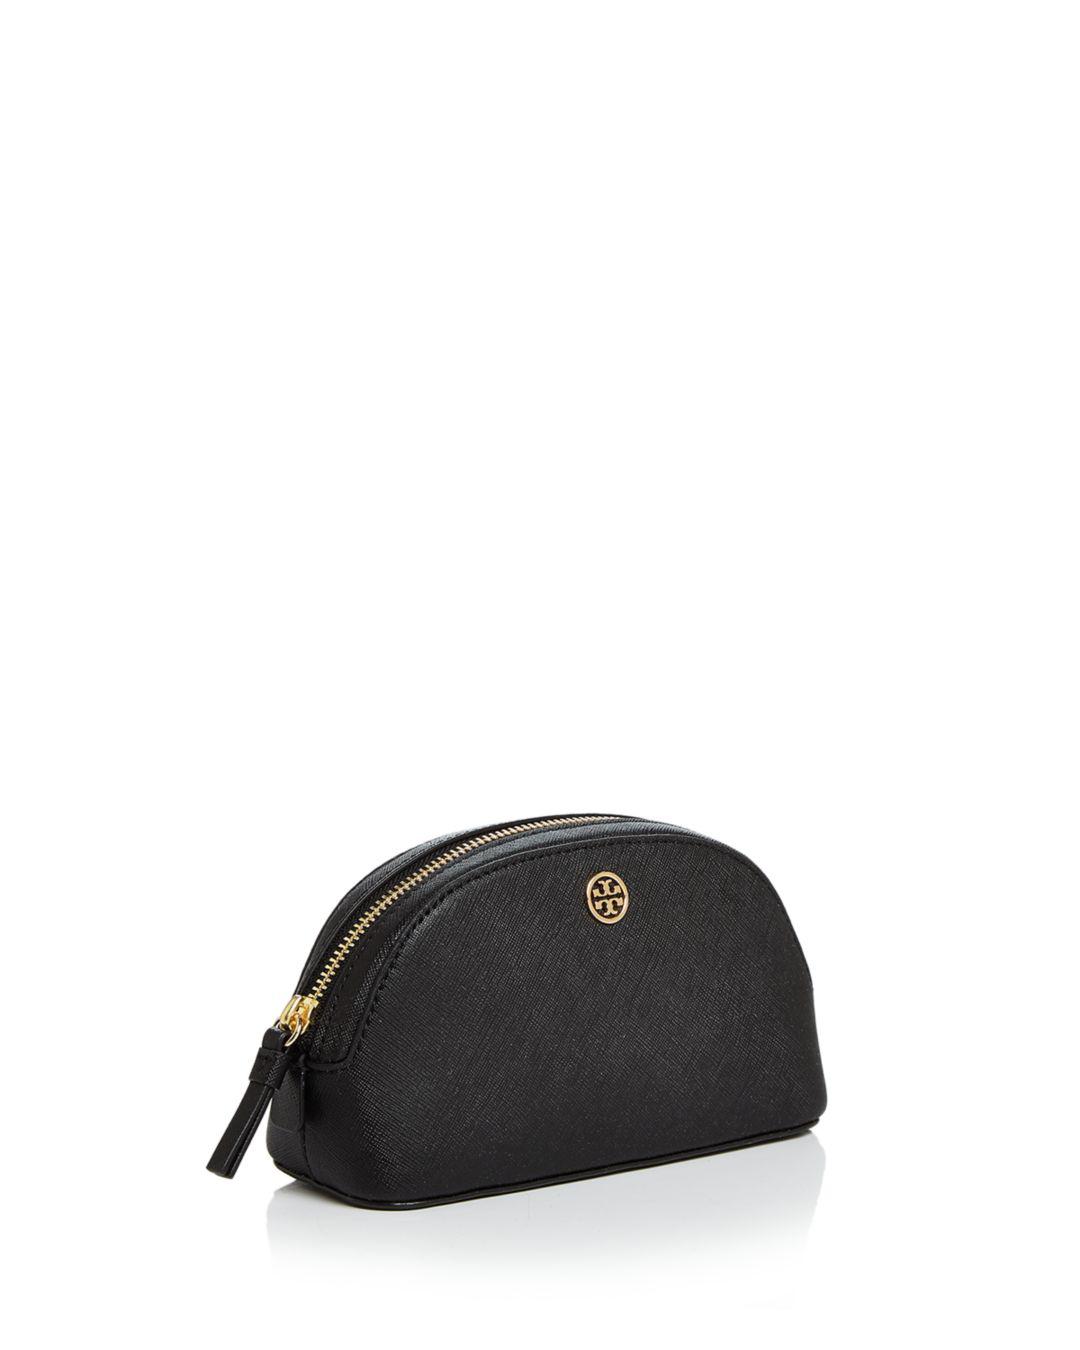 Tory Burch Robinson Small Makeup Bag in Black | Lyst